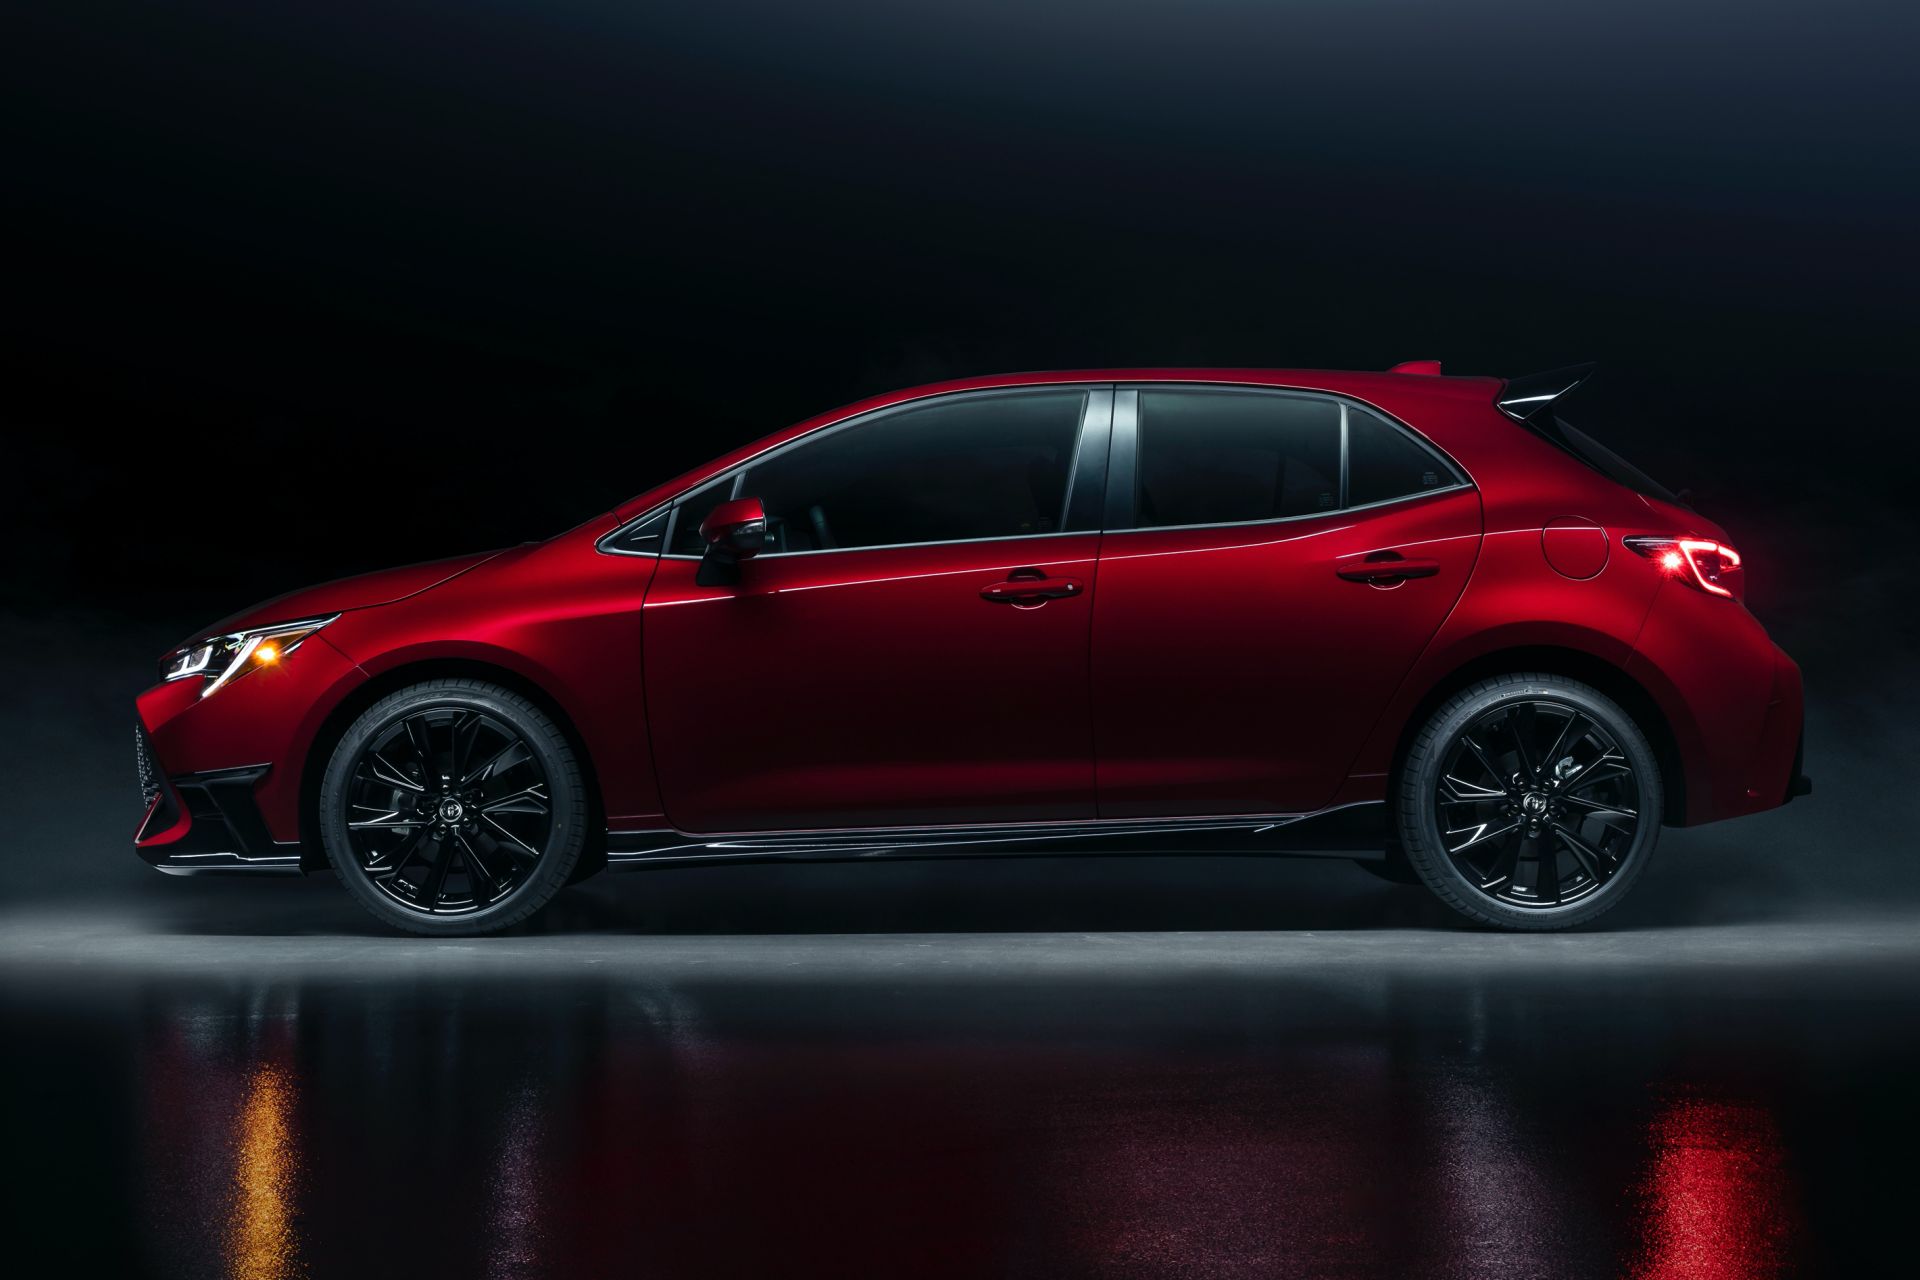 2021 Toyota Corolla Special Edition Wants To Give U.S. A Taste Of The